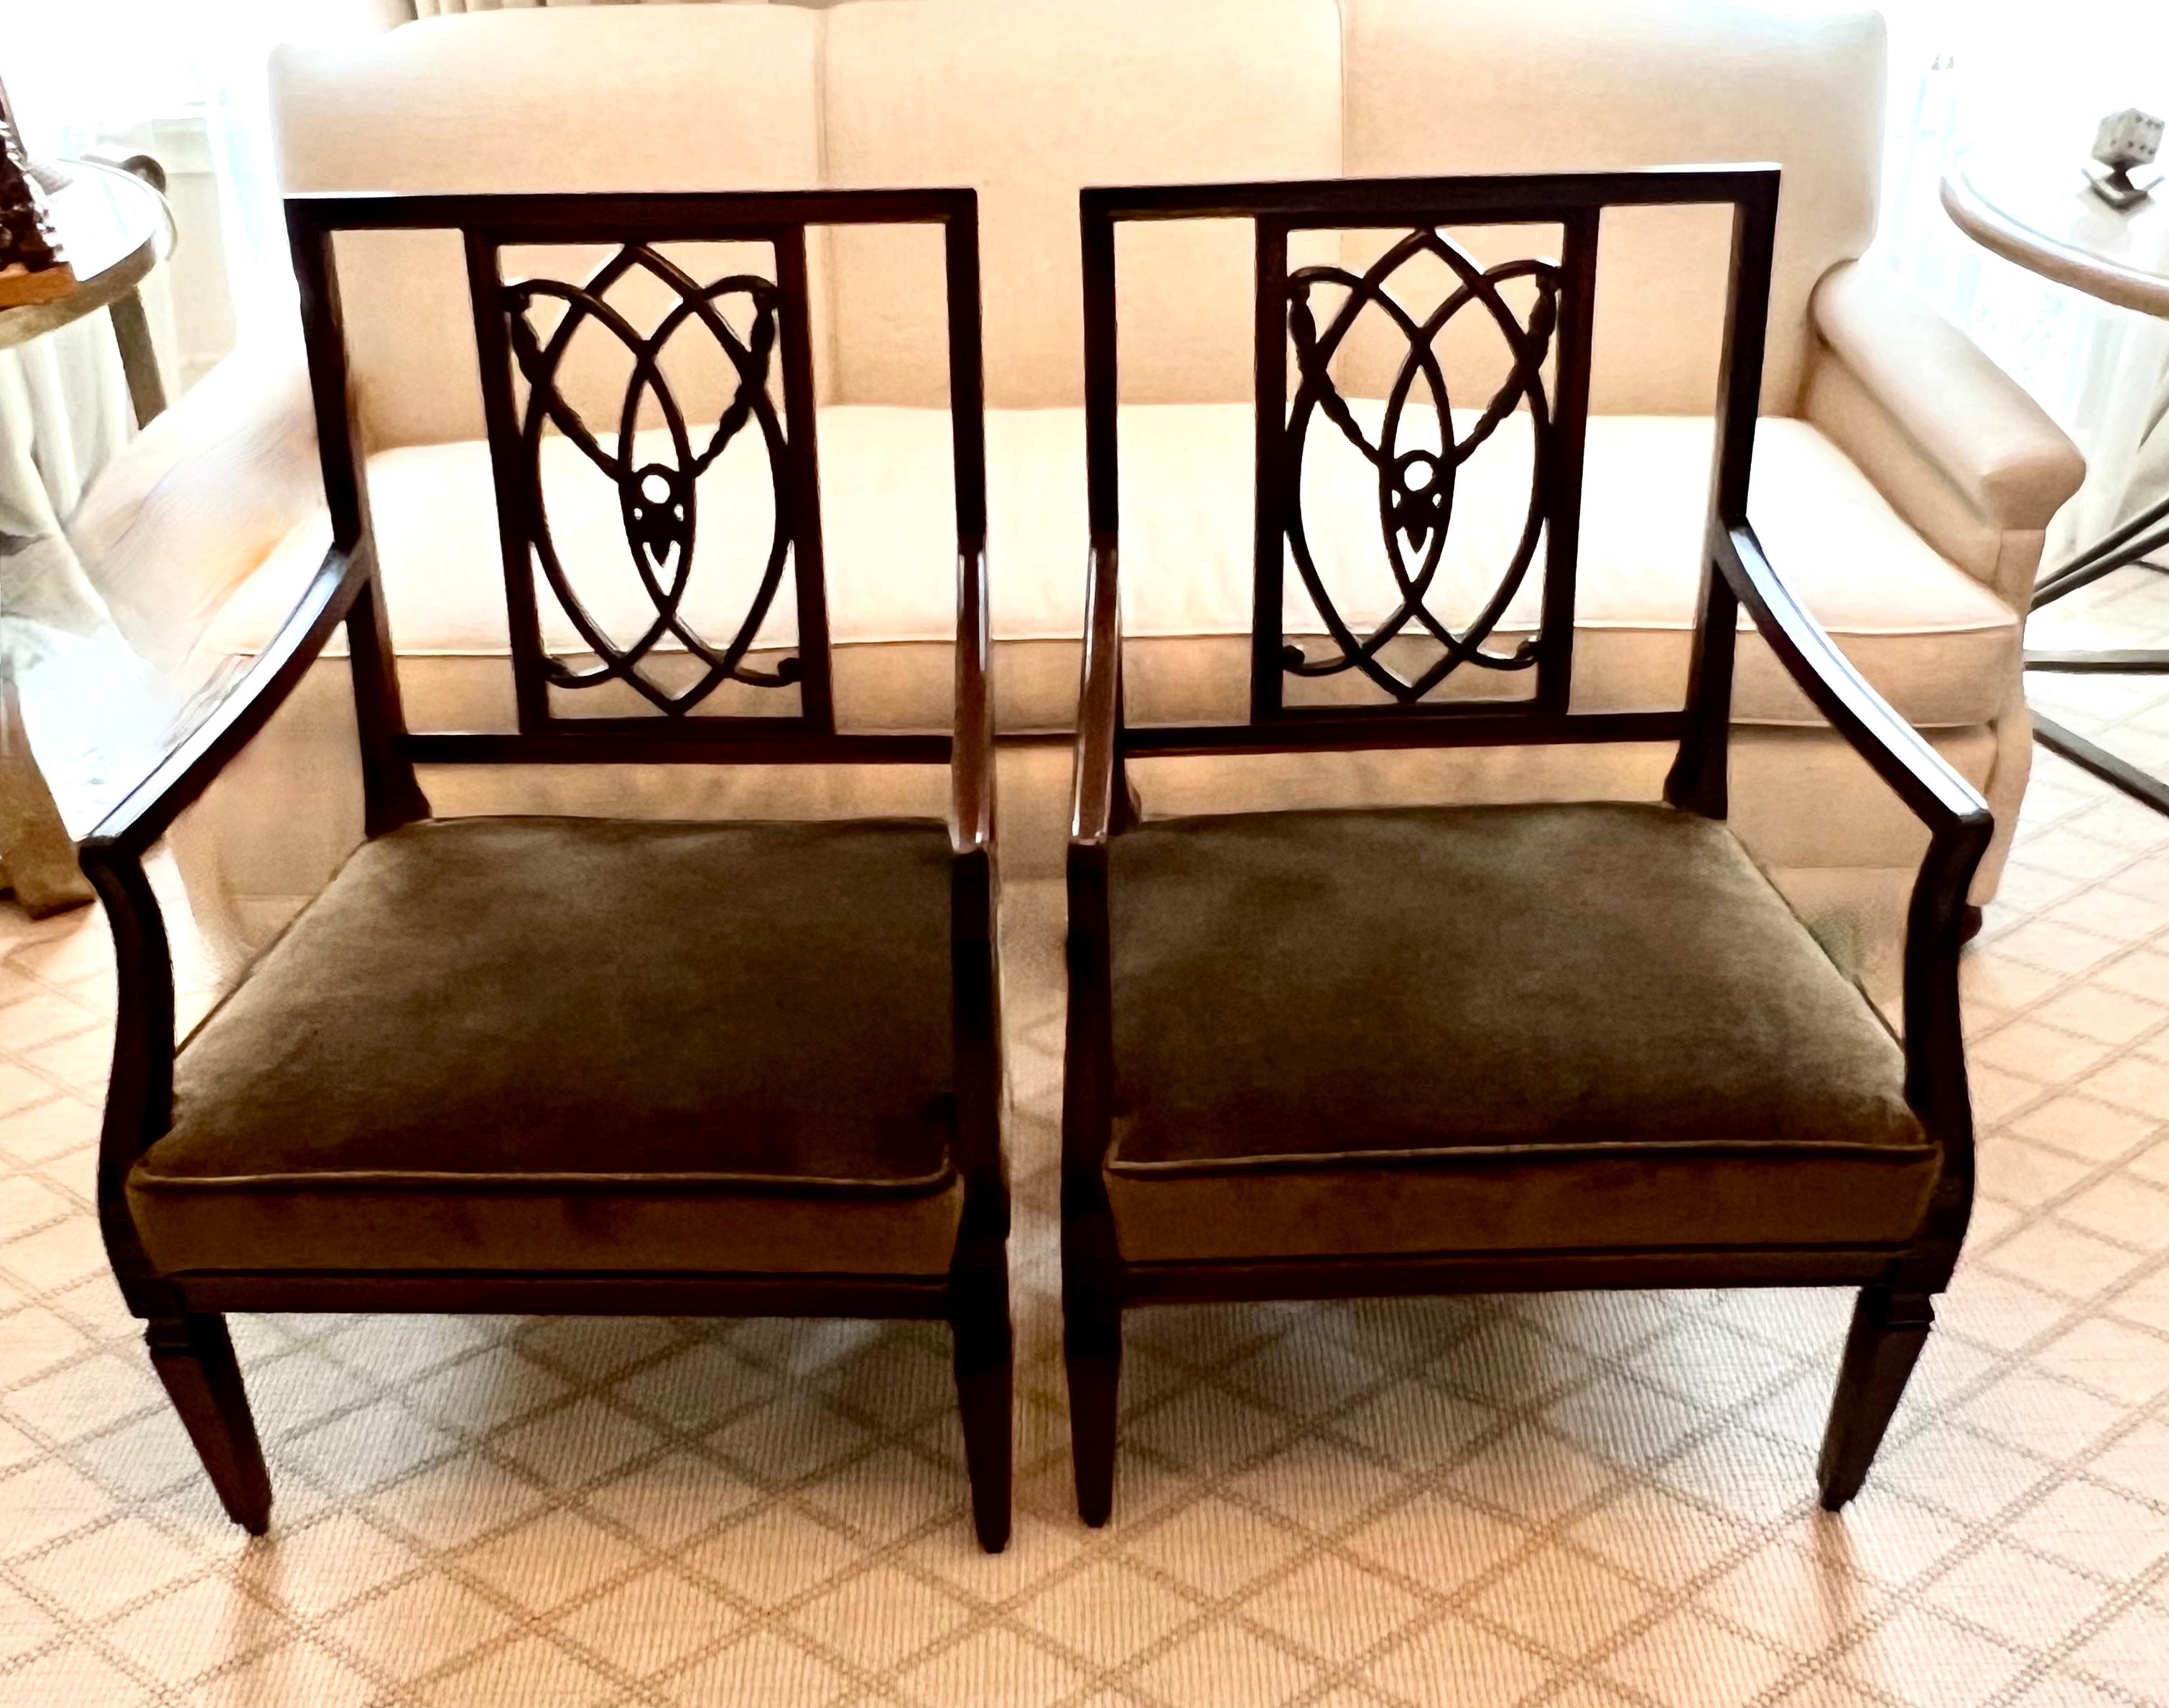 Pair of newly refinished and upholstered George lll or Hollywood Regency Side or Bergere Chairs in walnut finish with Mohair Upholstery.

The pair have a stunning carved back, are wide and very comfortable - a compliment to any room - bedroom,